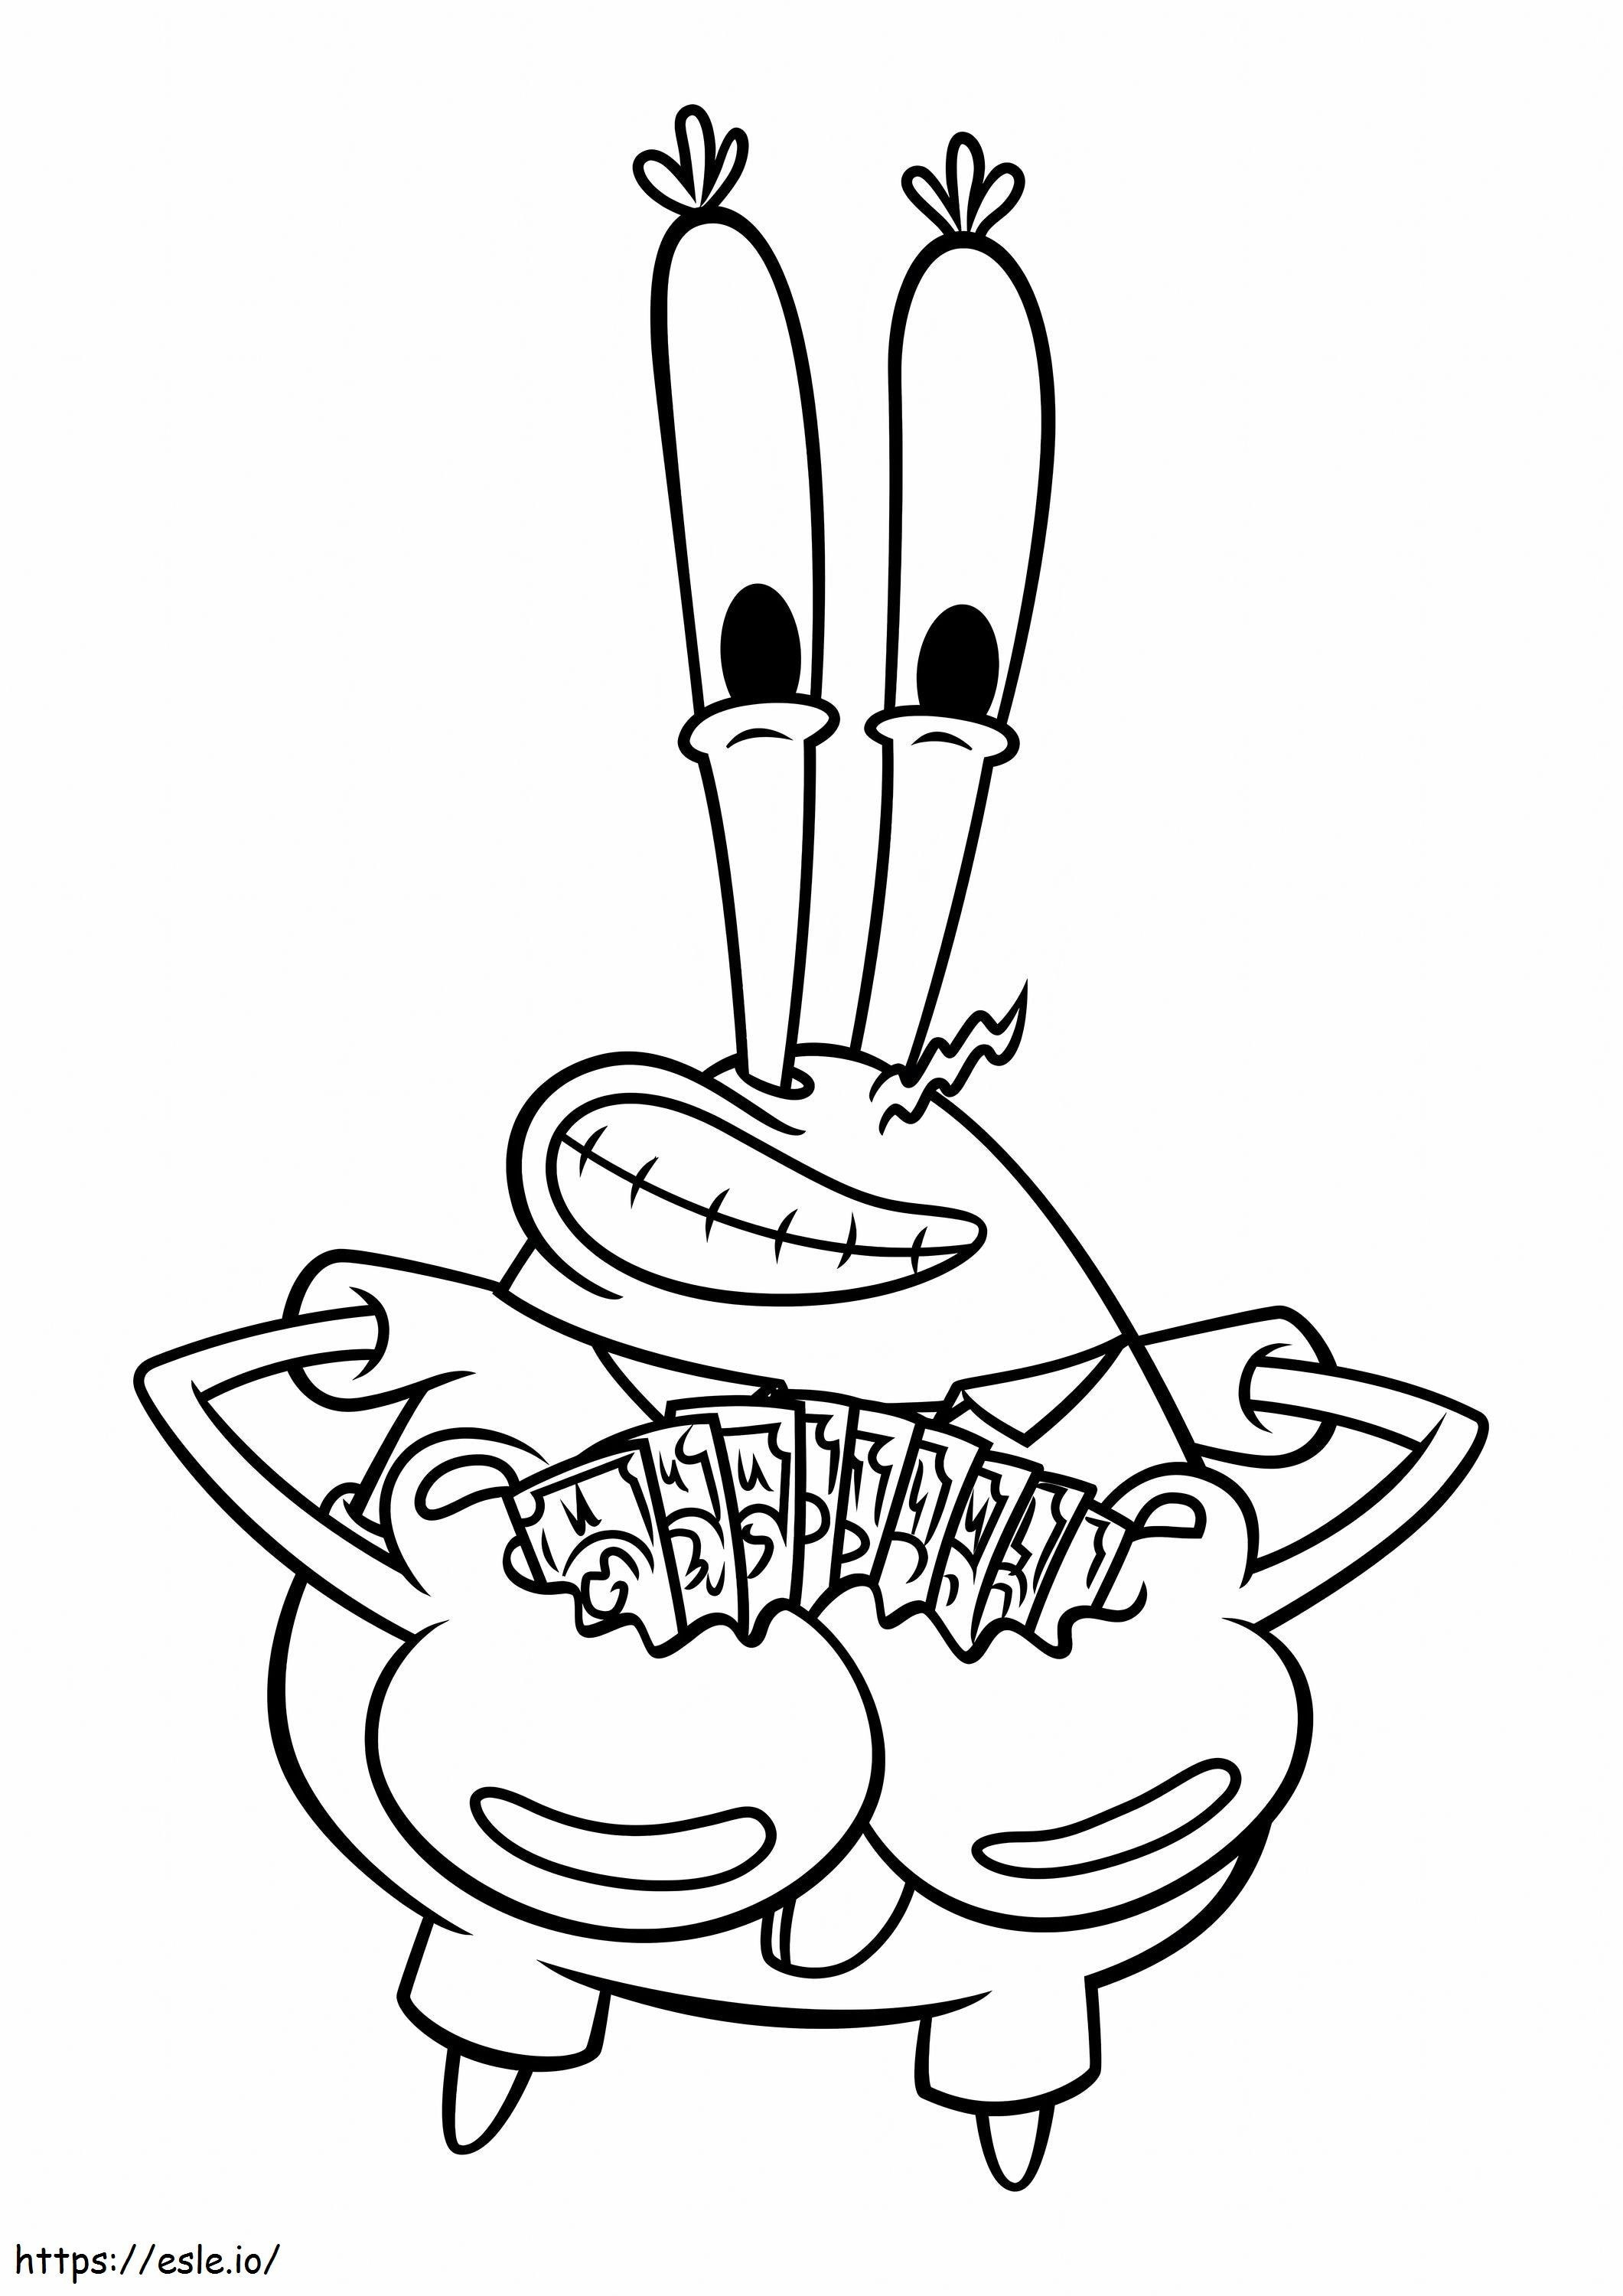 Mr. Krabs Awesome Scaled coloring page